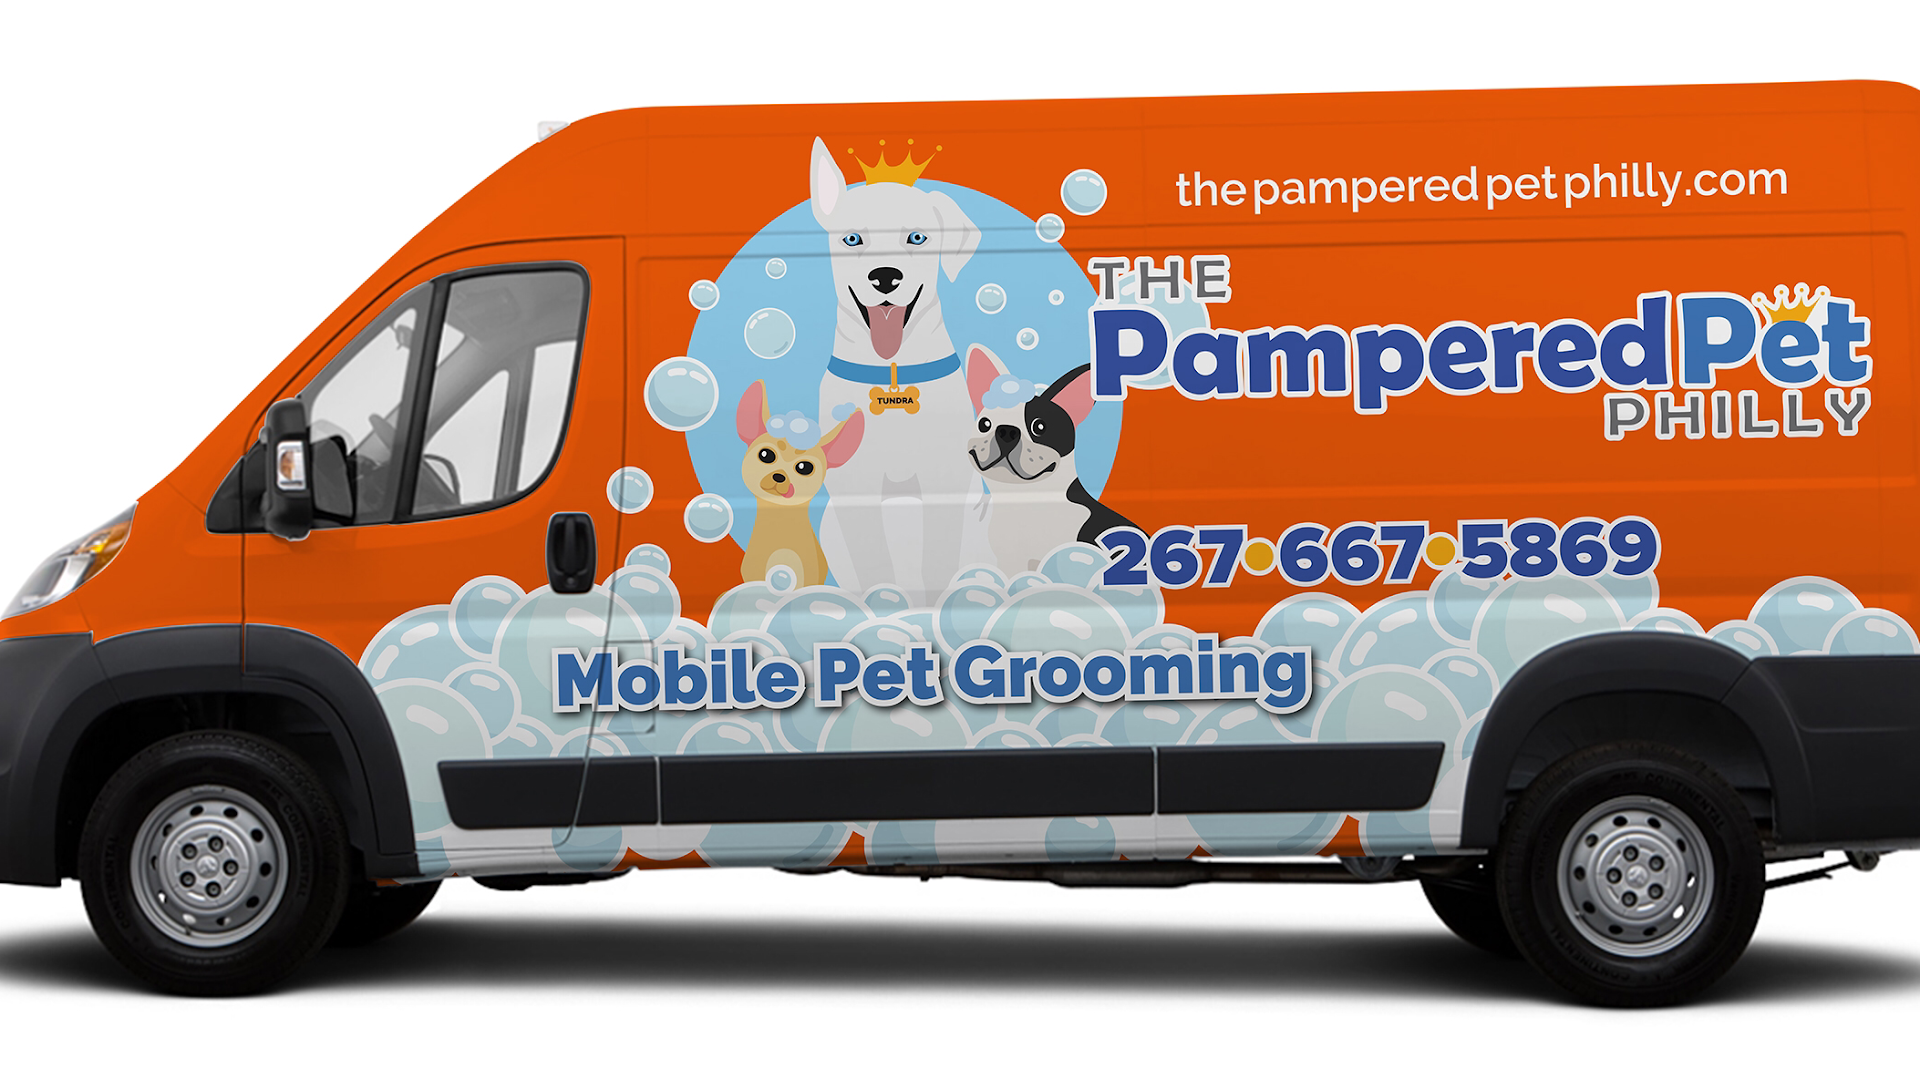 The Pampered Pet Philly, Mobile Pet Grooming